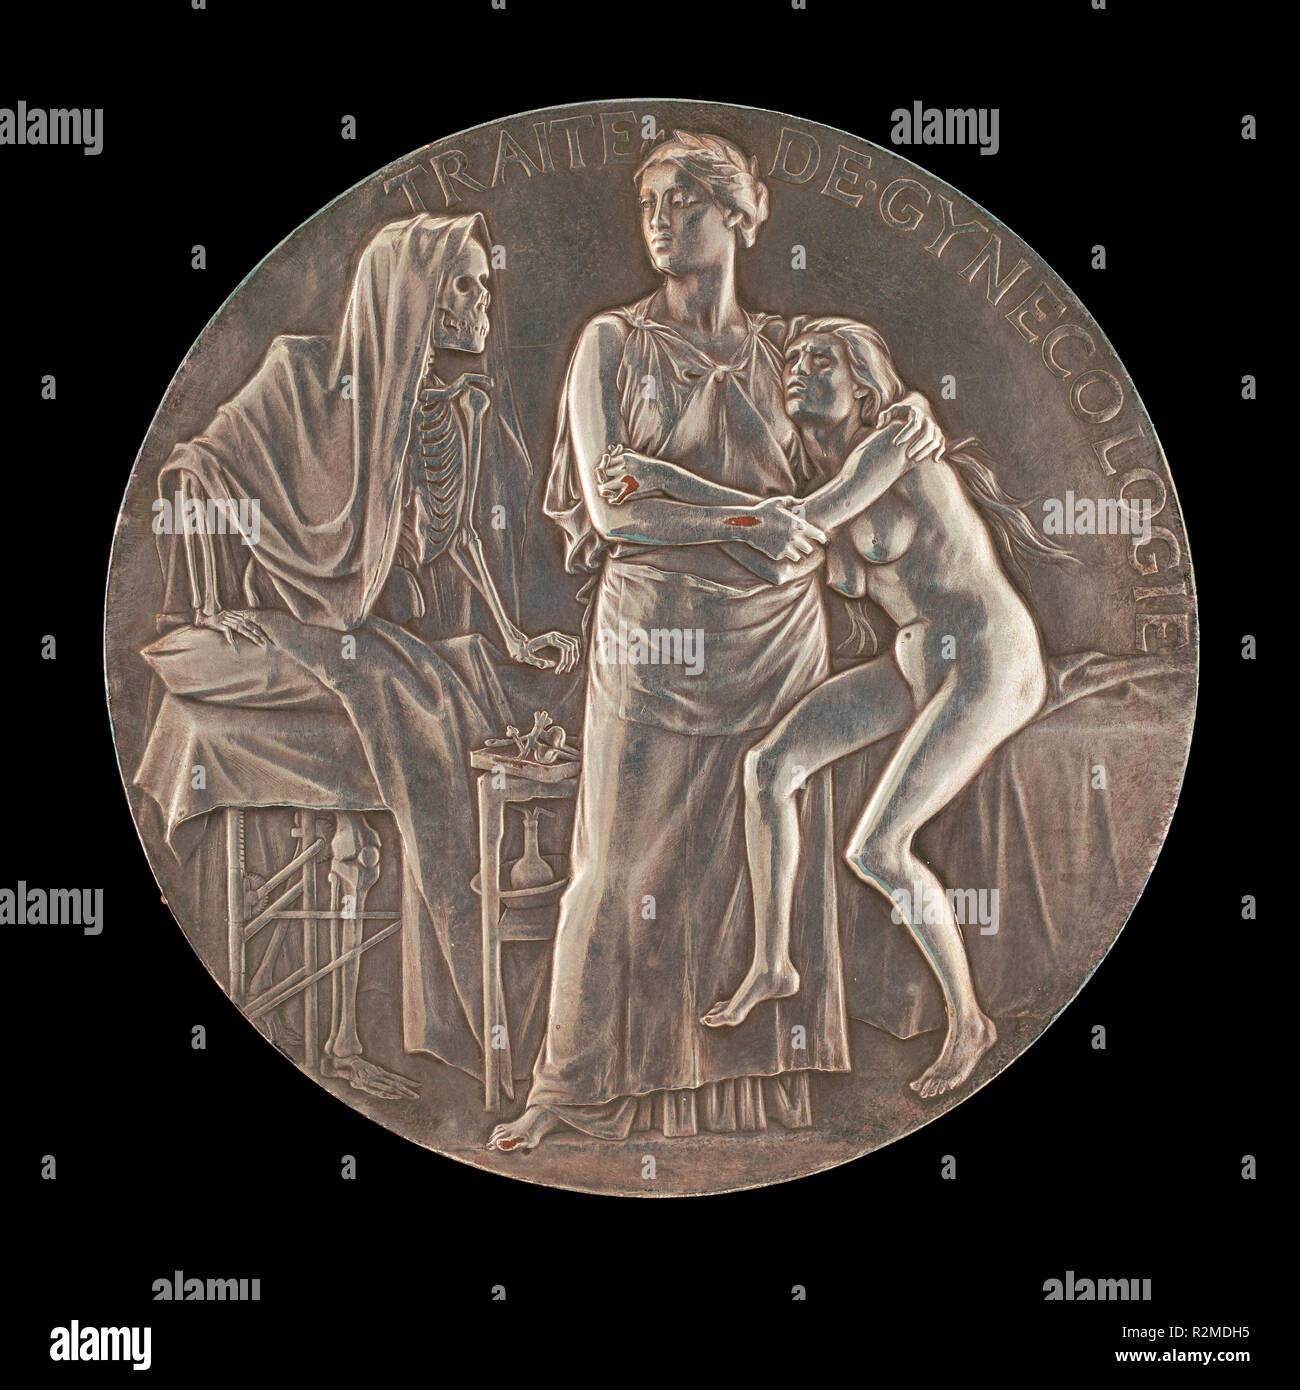 Allegory of the Fight Against Death [reverse]. Dated: 1906. Dimensions: overall (diameter): 10.91 cm (4 5/16 in.). Medium: silvered copper. Museum: National Gallery of Art, Washington DC. Author: Jules-Clément Chaplain. Stock Photo